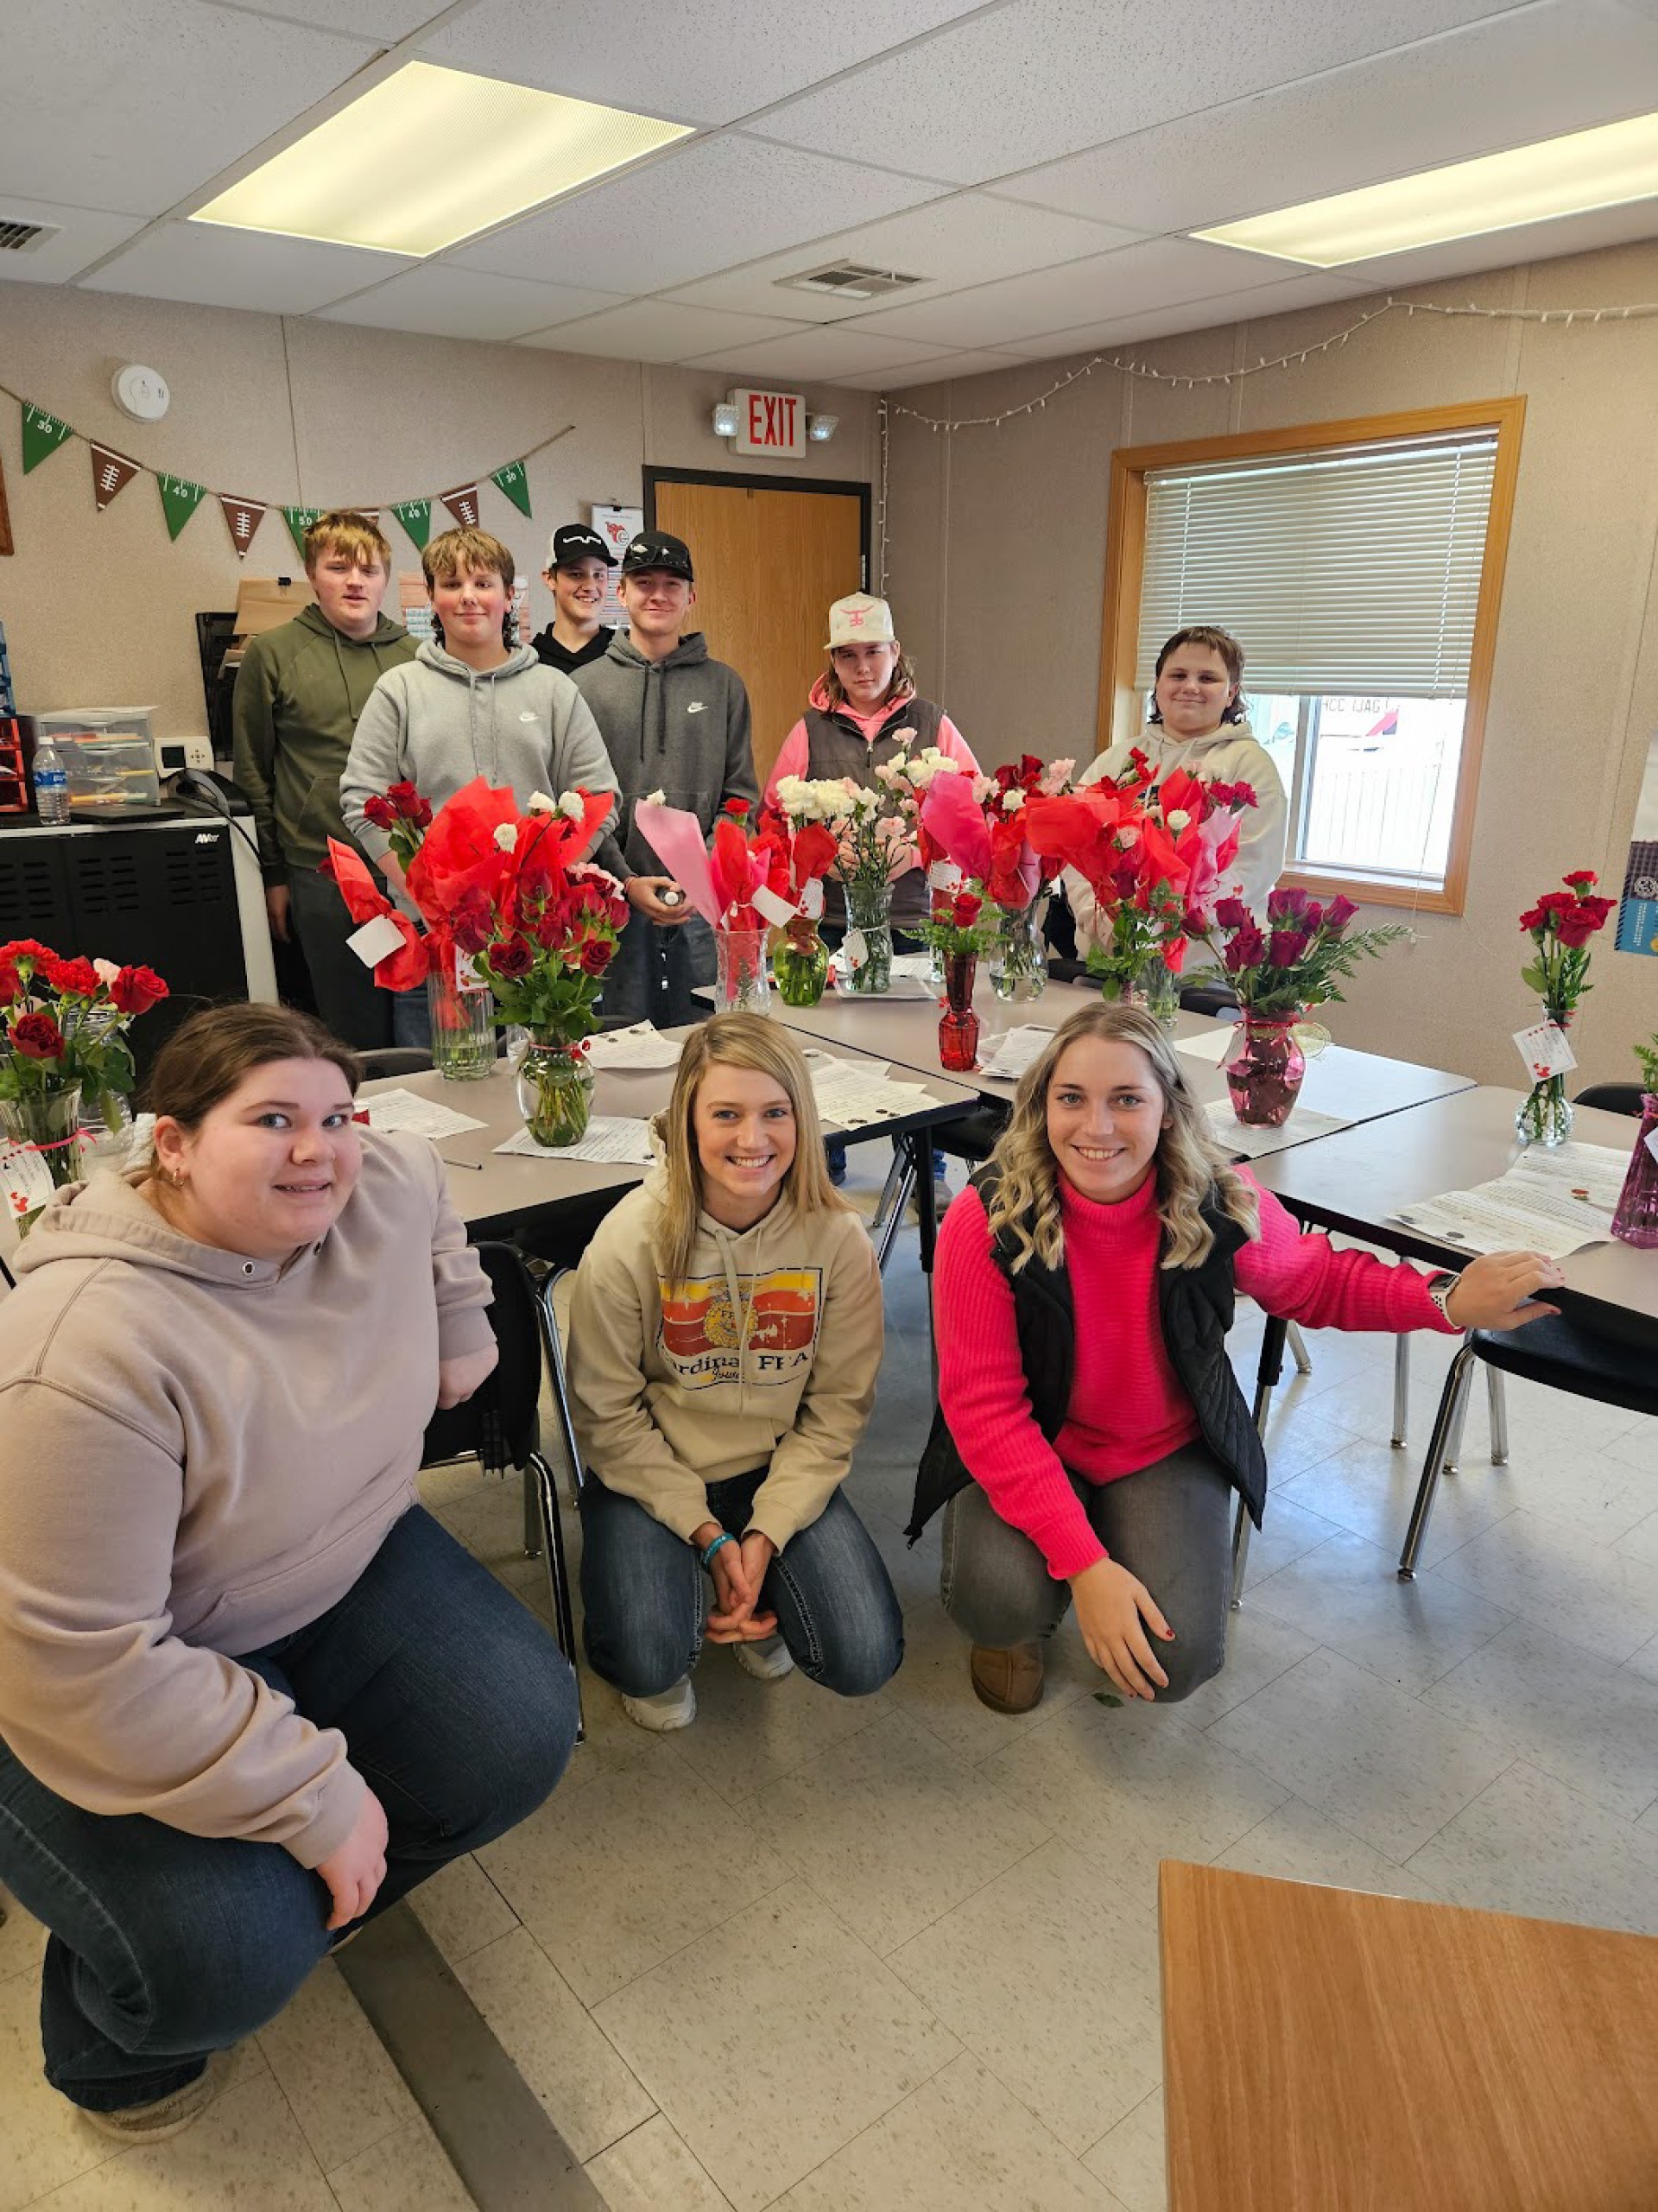 FFA students pose around school tables with red roses in vases on them.